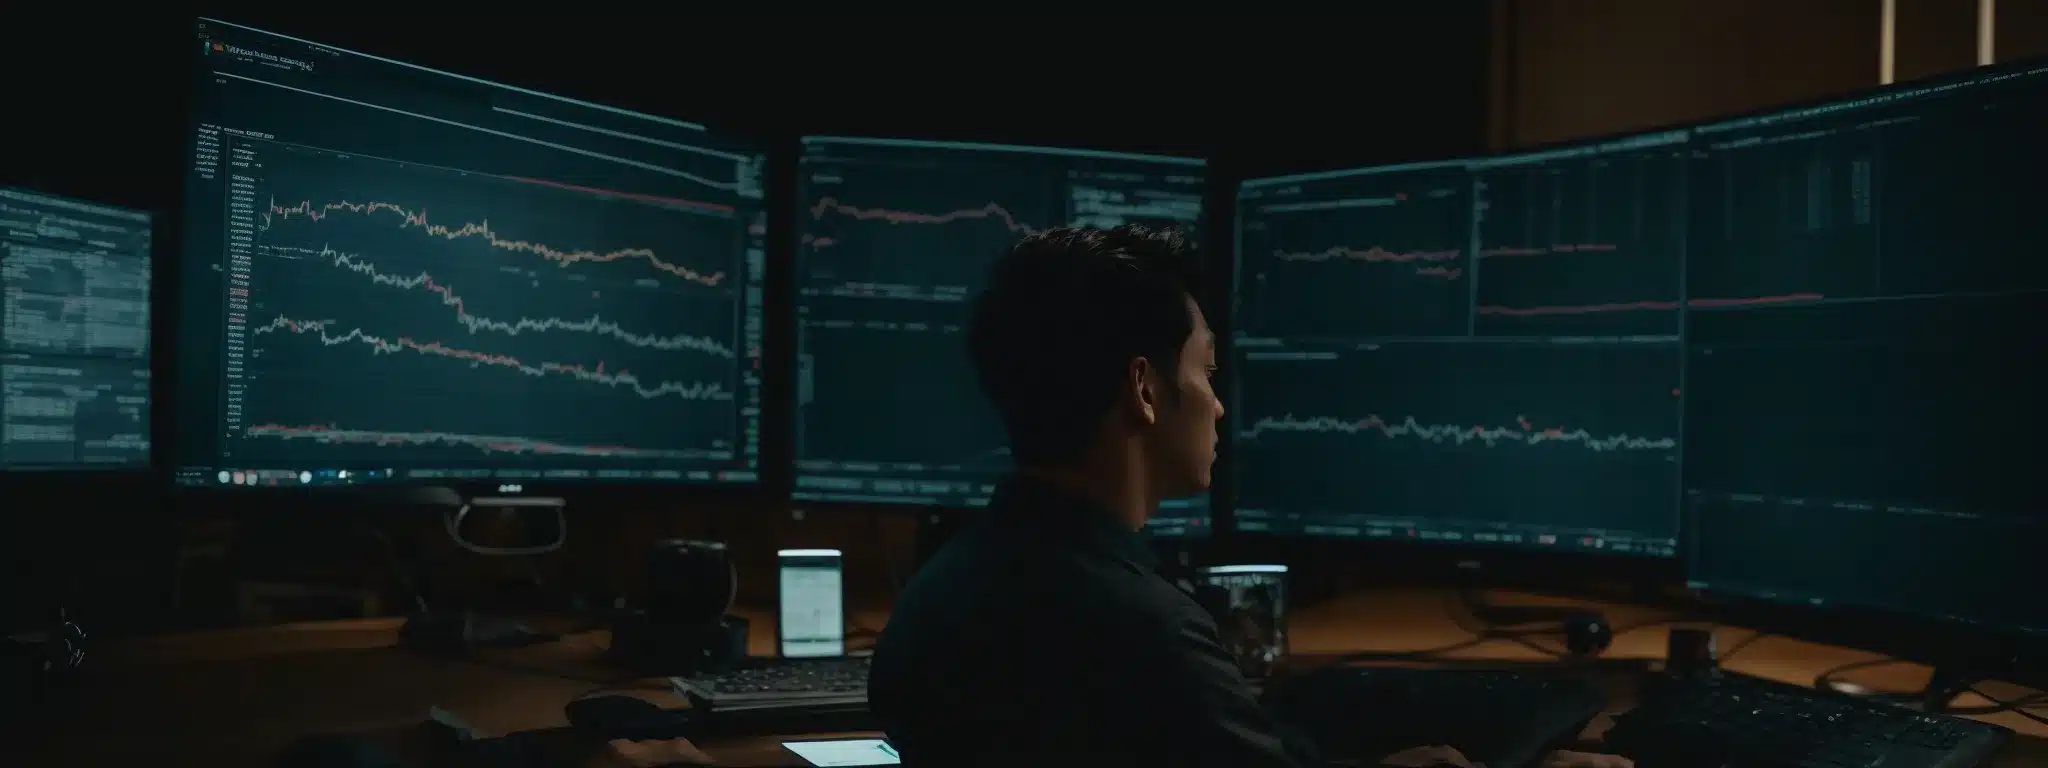 A Digital Marketer Is Intently Analyzing A Dashboard Of Metrics On A Large Computer Screen, Plotting The Next Strategic Move.